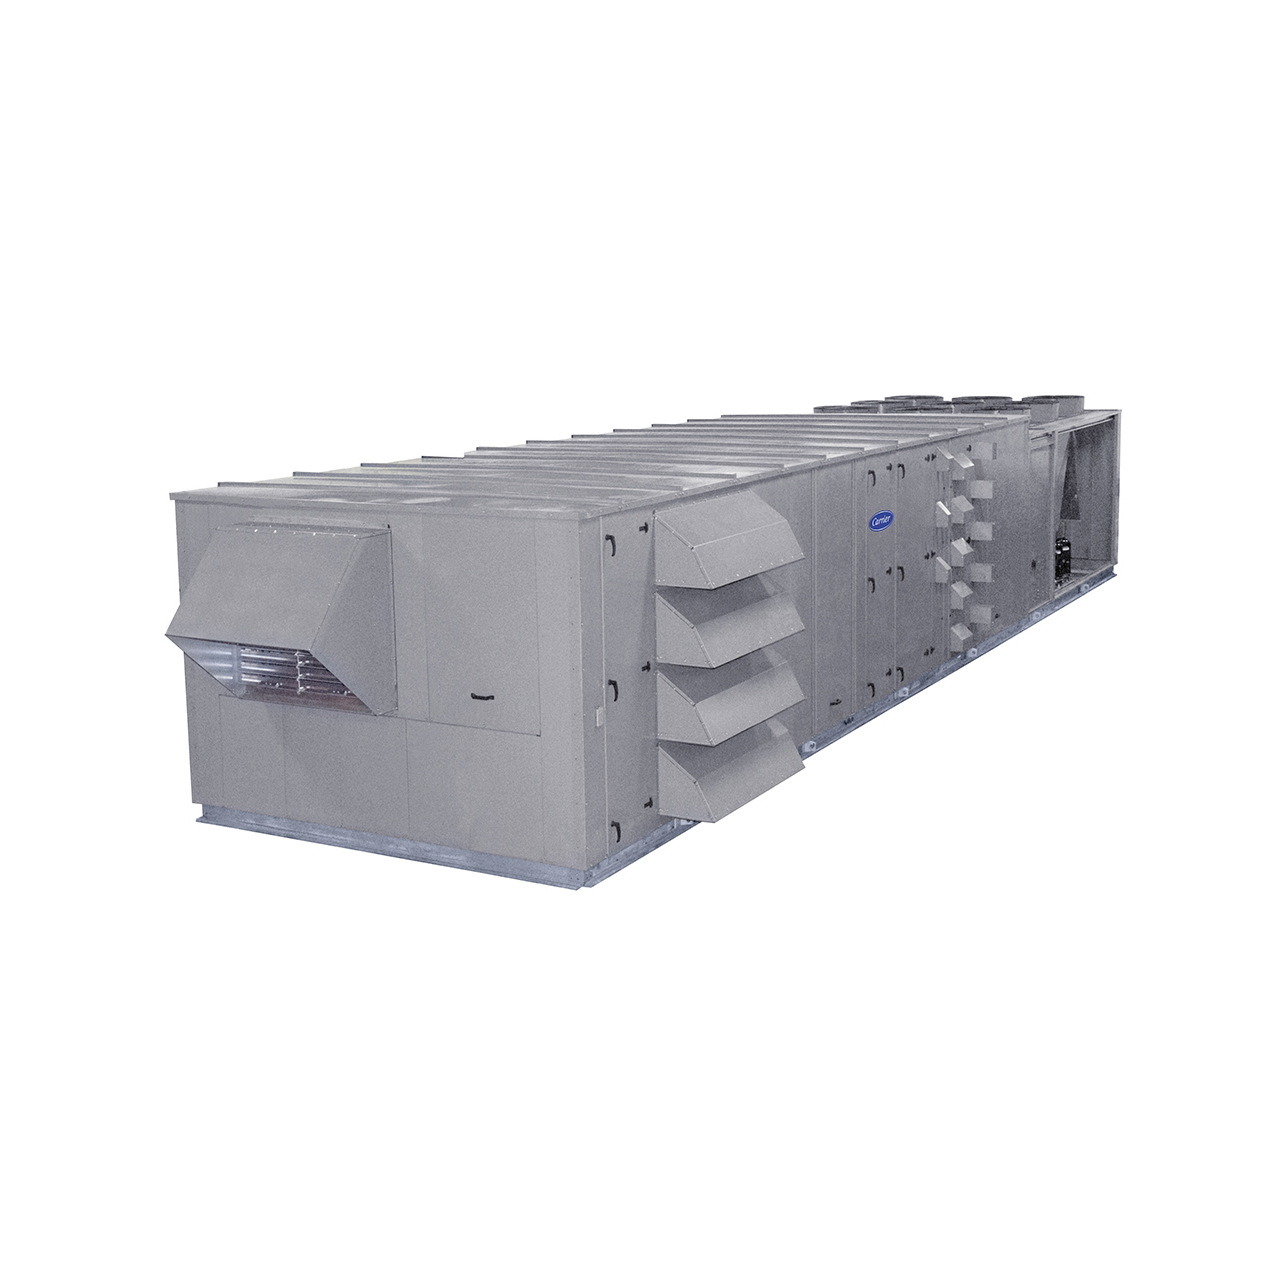 Carrier N Series rooftop units are pre-wired and factory-tested in both cooling and heating modes. All 48N models feature a double wall foam panel cabinet design with hinged man-sized access panels.